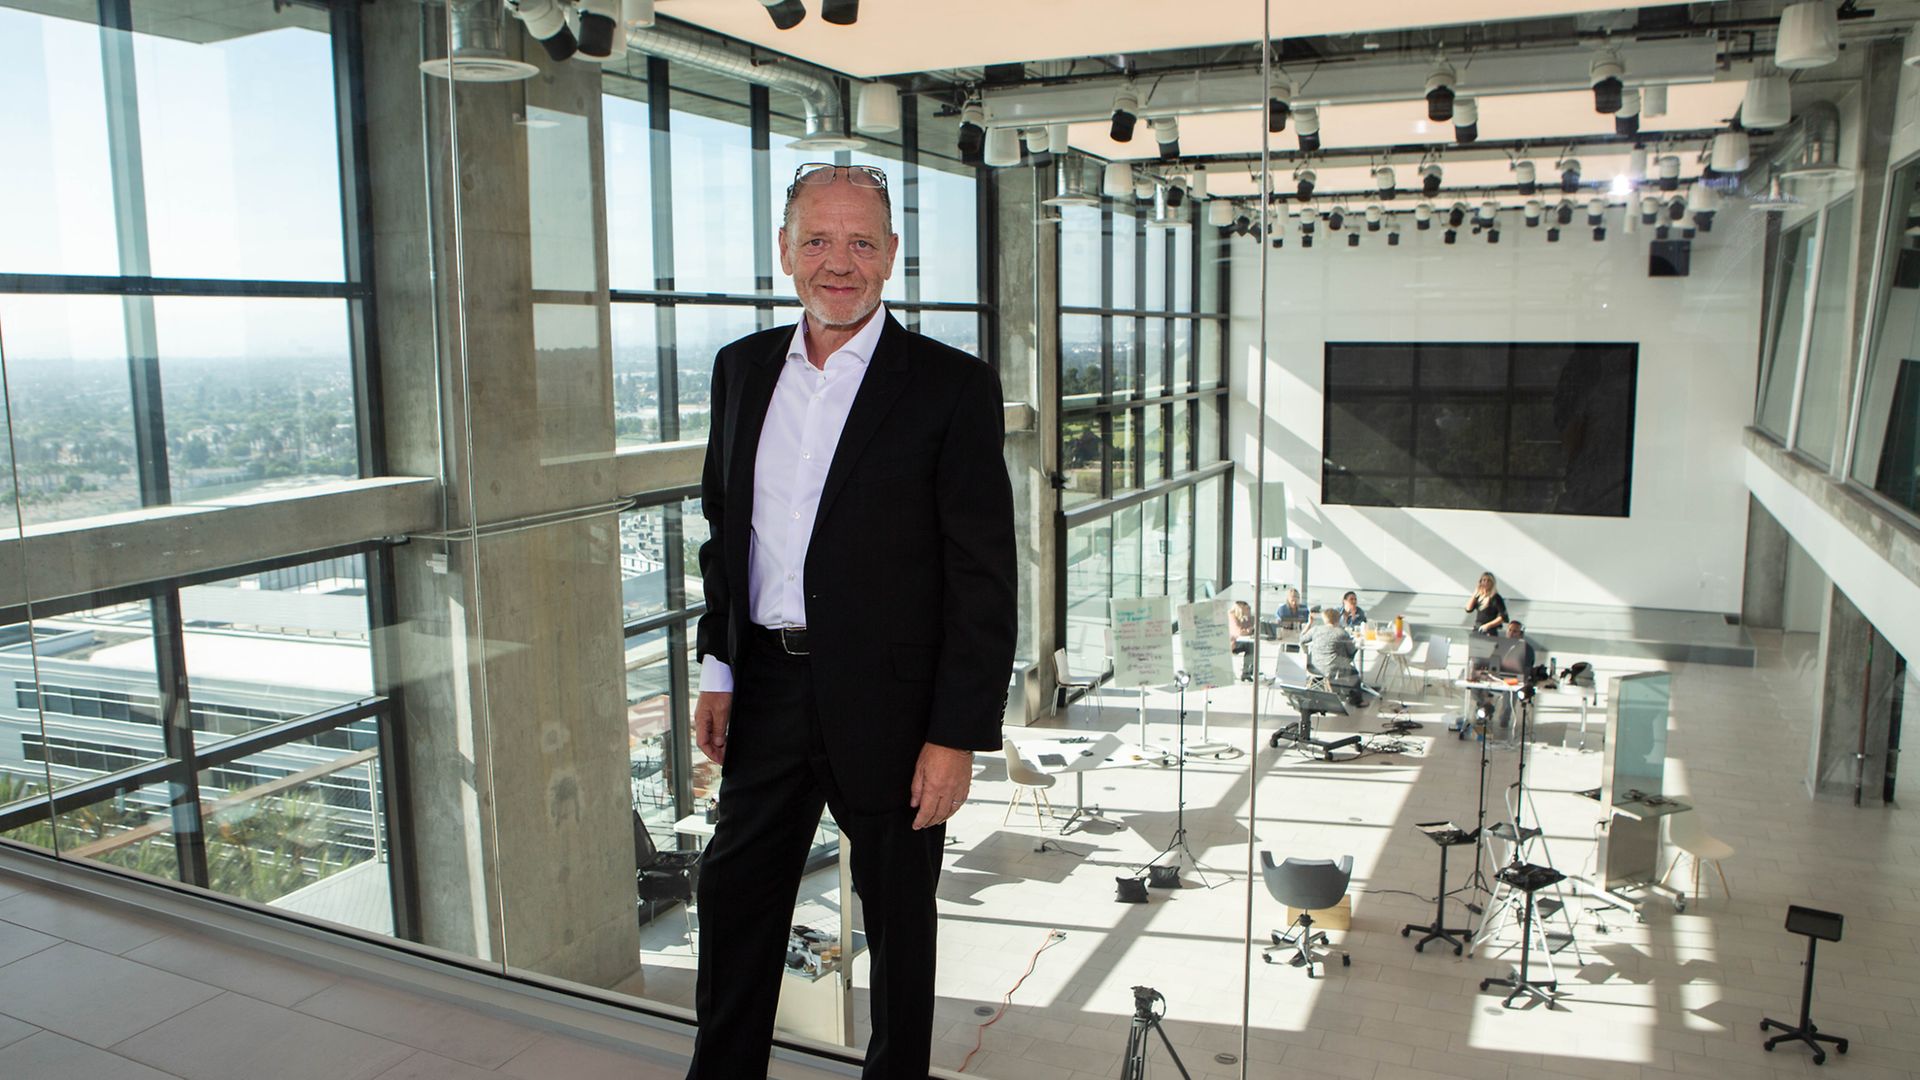 Stefan L. Mund, Regional Head Henkel Beauty Care Professional North America in front of a glass wall with view of a seminar room with people